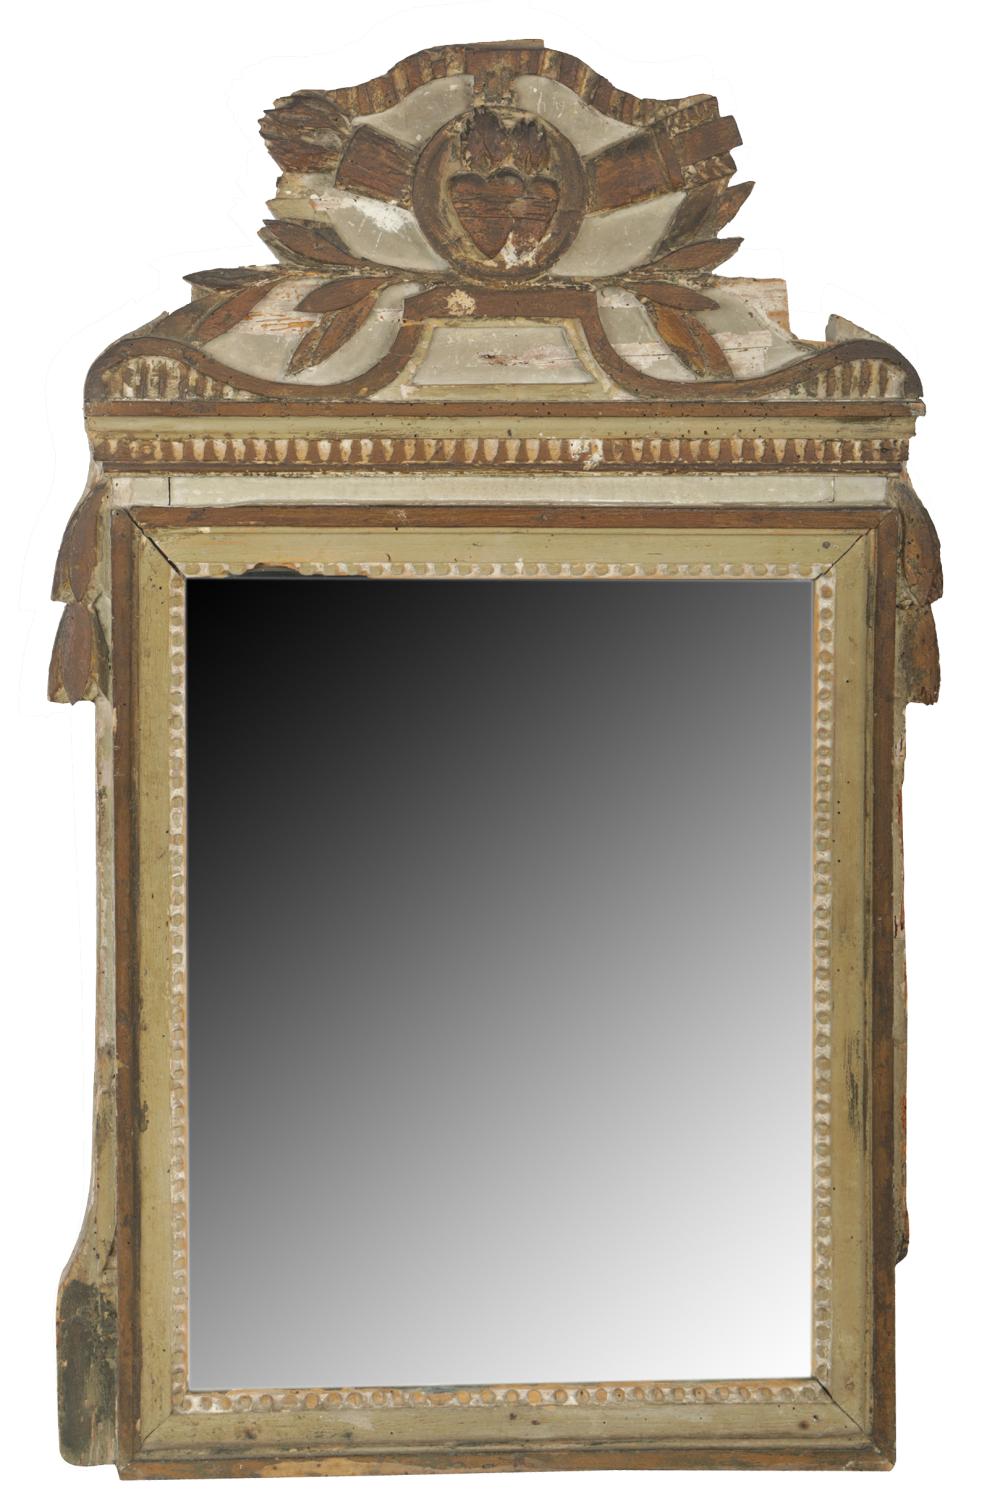 NEOCLASSIC PAINTED WOOD MIRRORwith